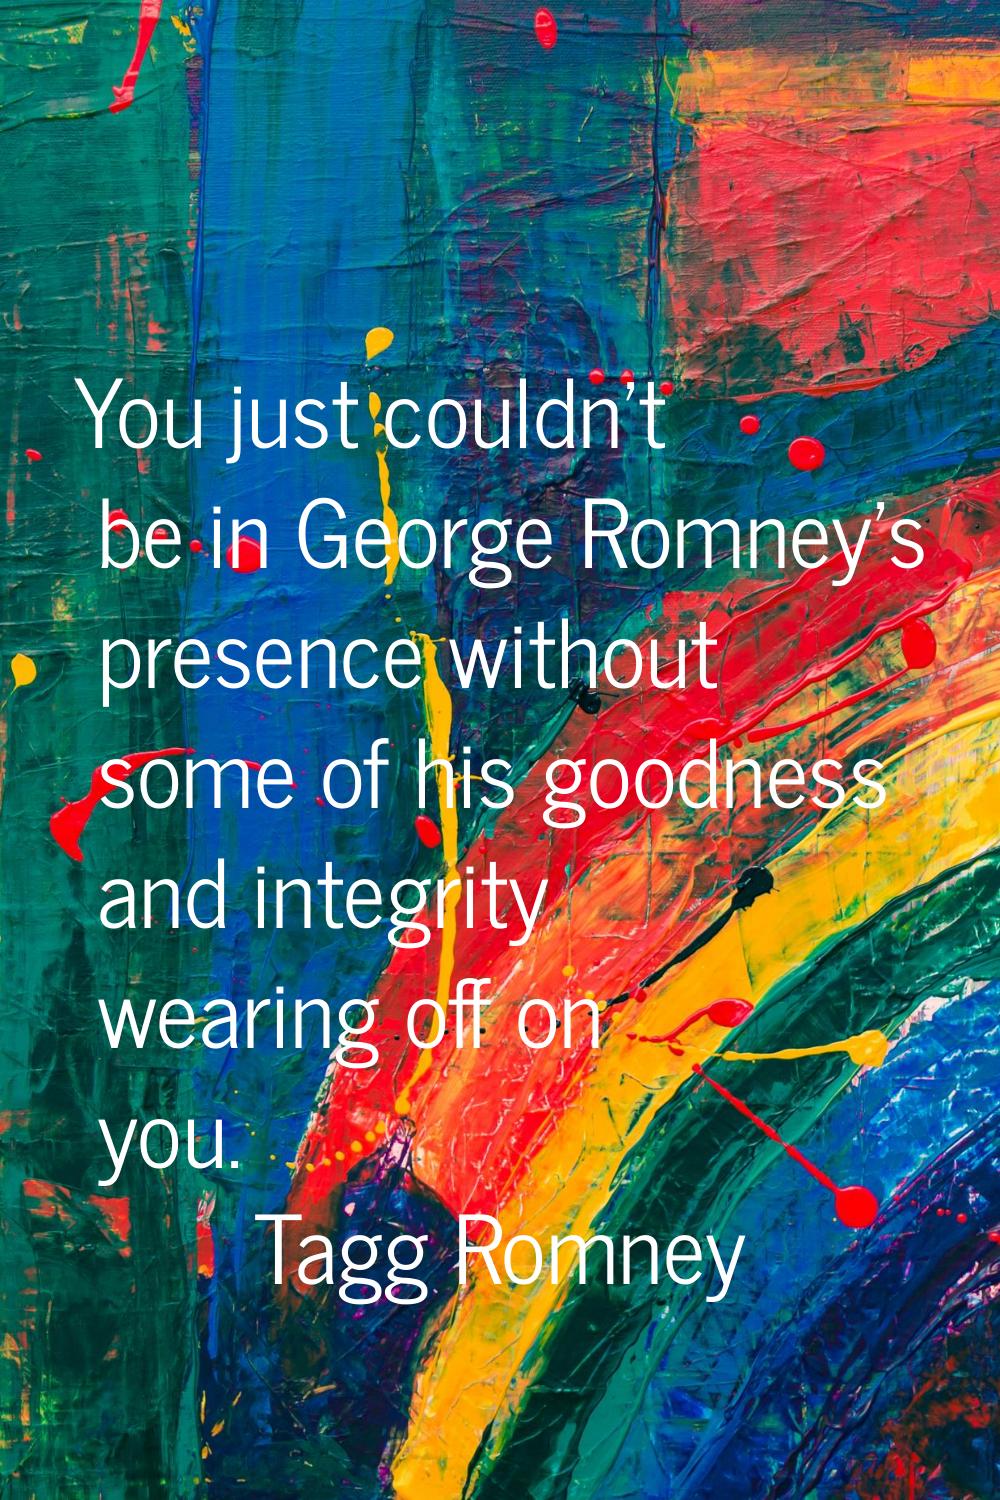 You just couldn't be in George Romney's presence without some of his goodness and integrity wearing